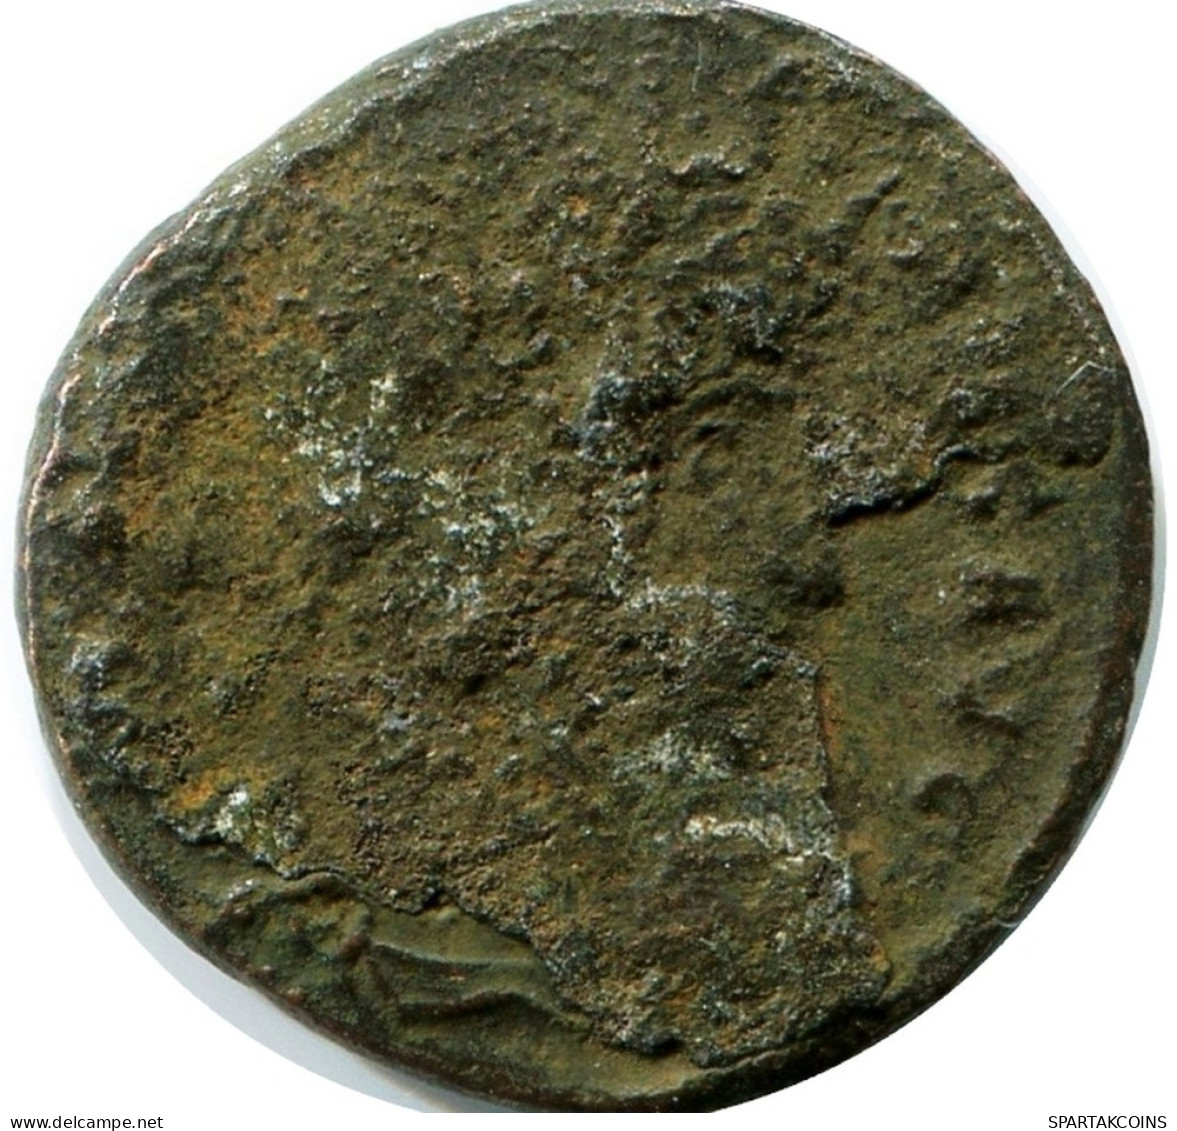 ROMAN Pièce MINTED IN ANTIOCH FROM THE ROYAL ONTARIO MUSEUM #ANC11305.14.F.A - The Christian Empire (307 AD To 363 AD)